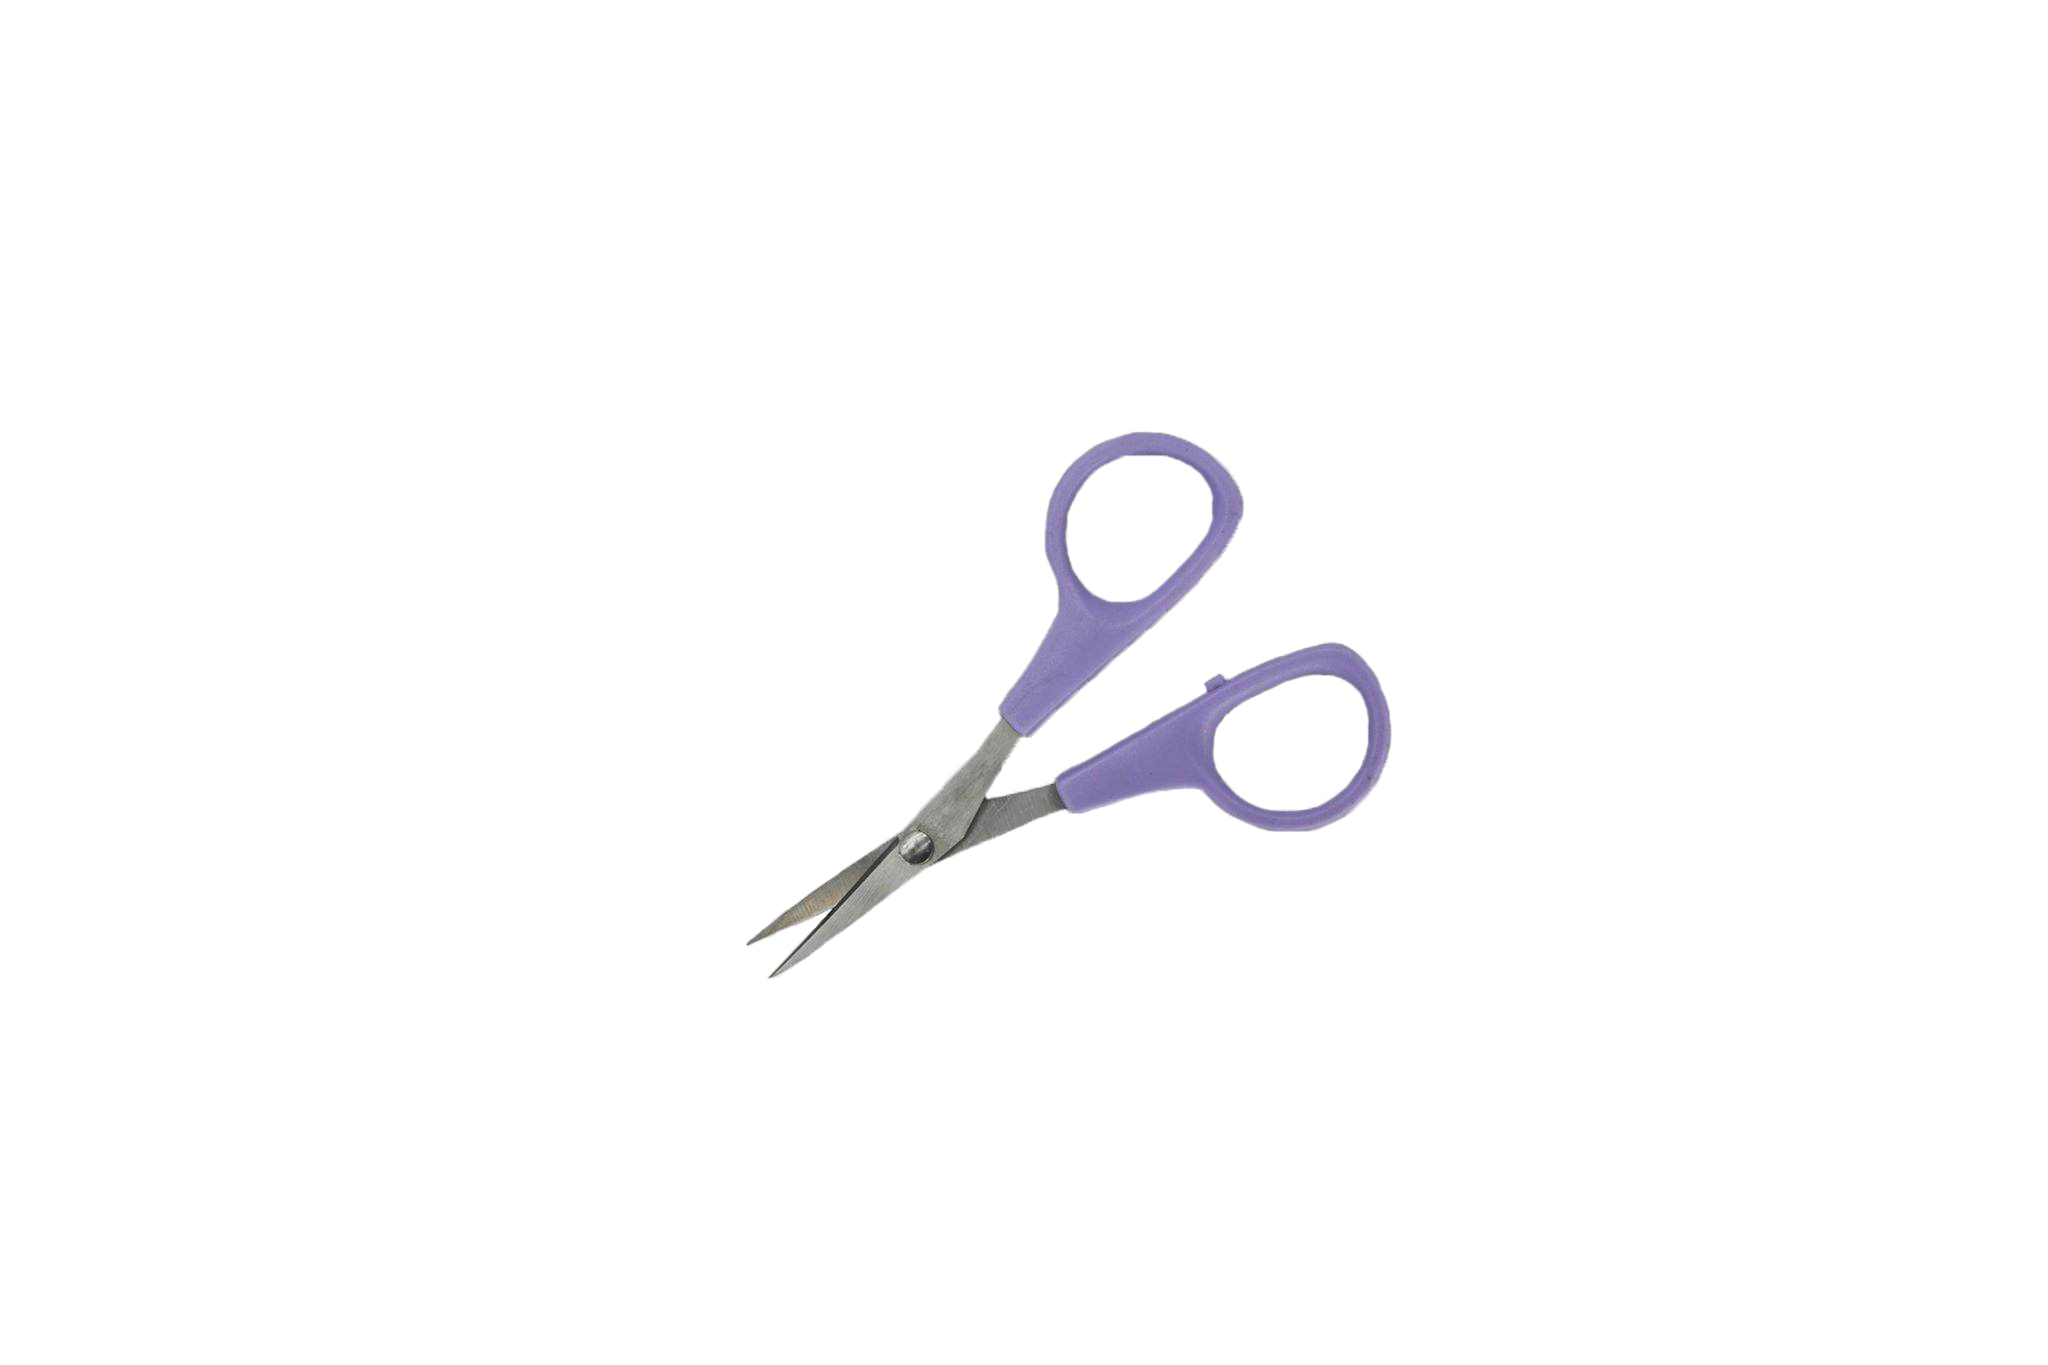 Curved Blade Cotton Candy 3¼ Embroidery Scissors with Sheath-Lavender